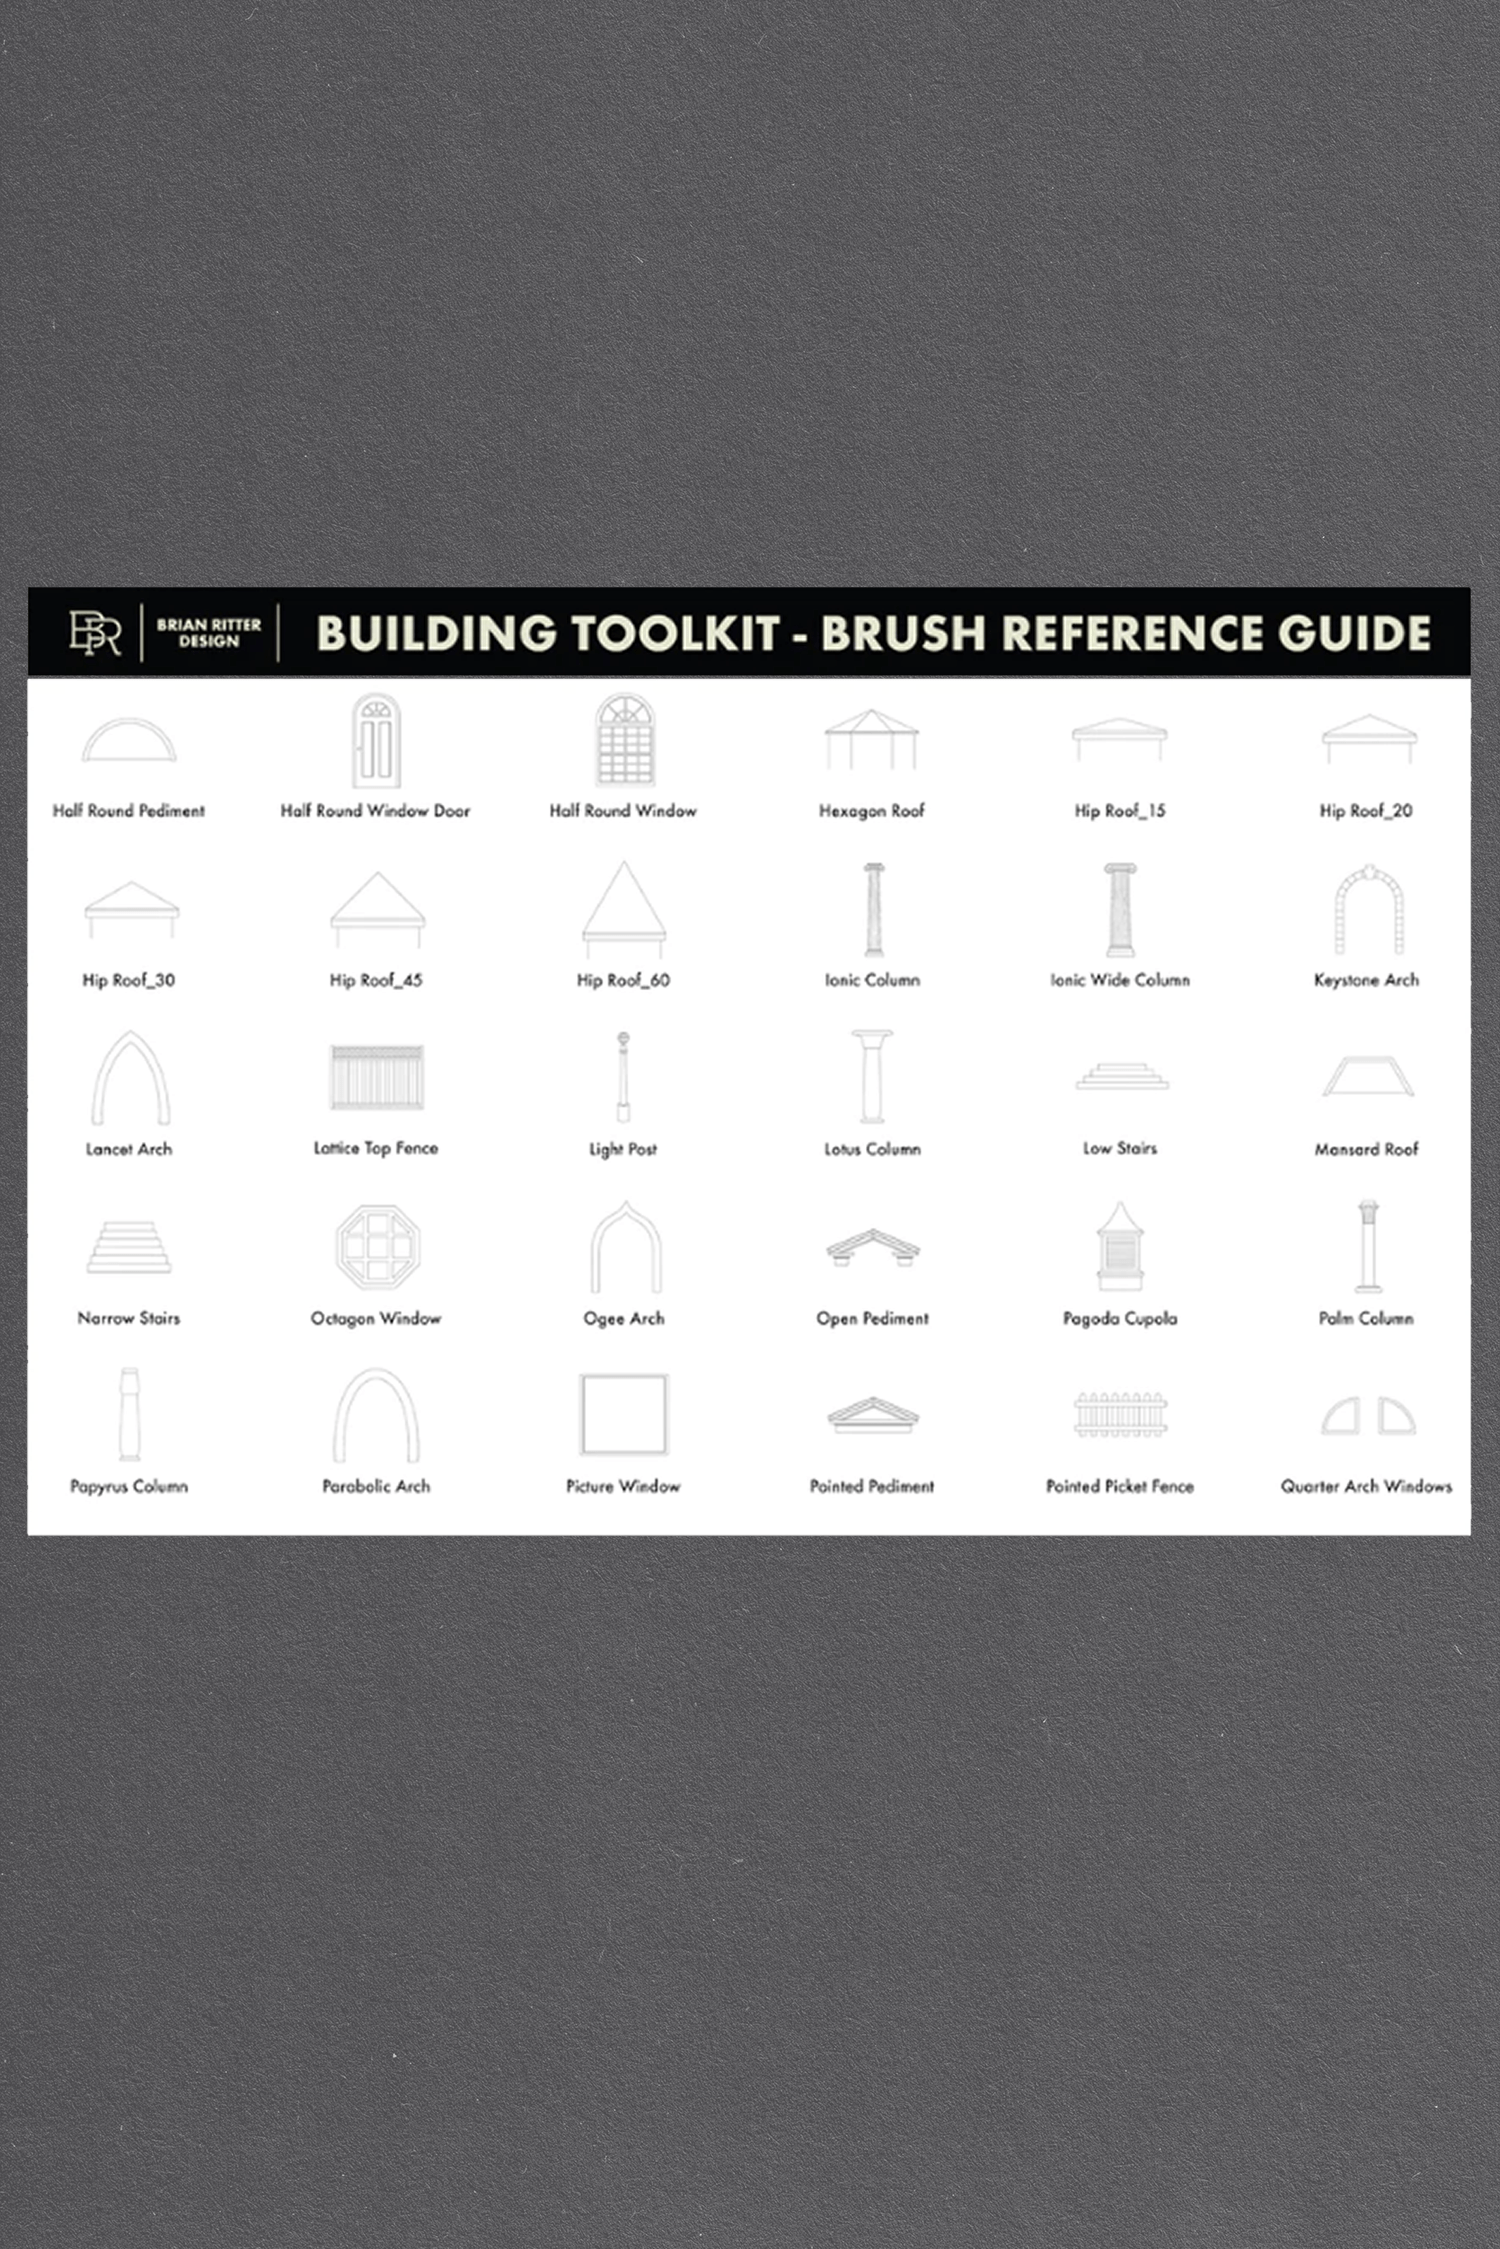 Buildings Toolkit by Brian Ritter Design